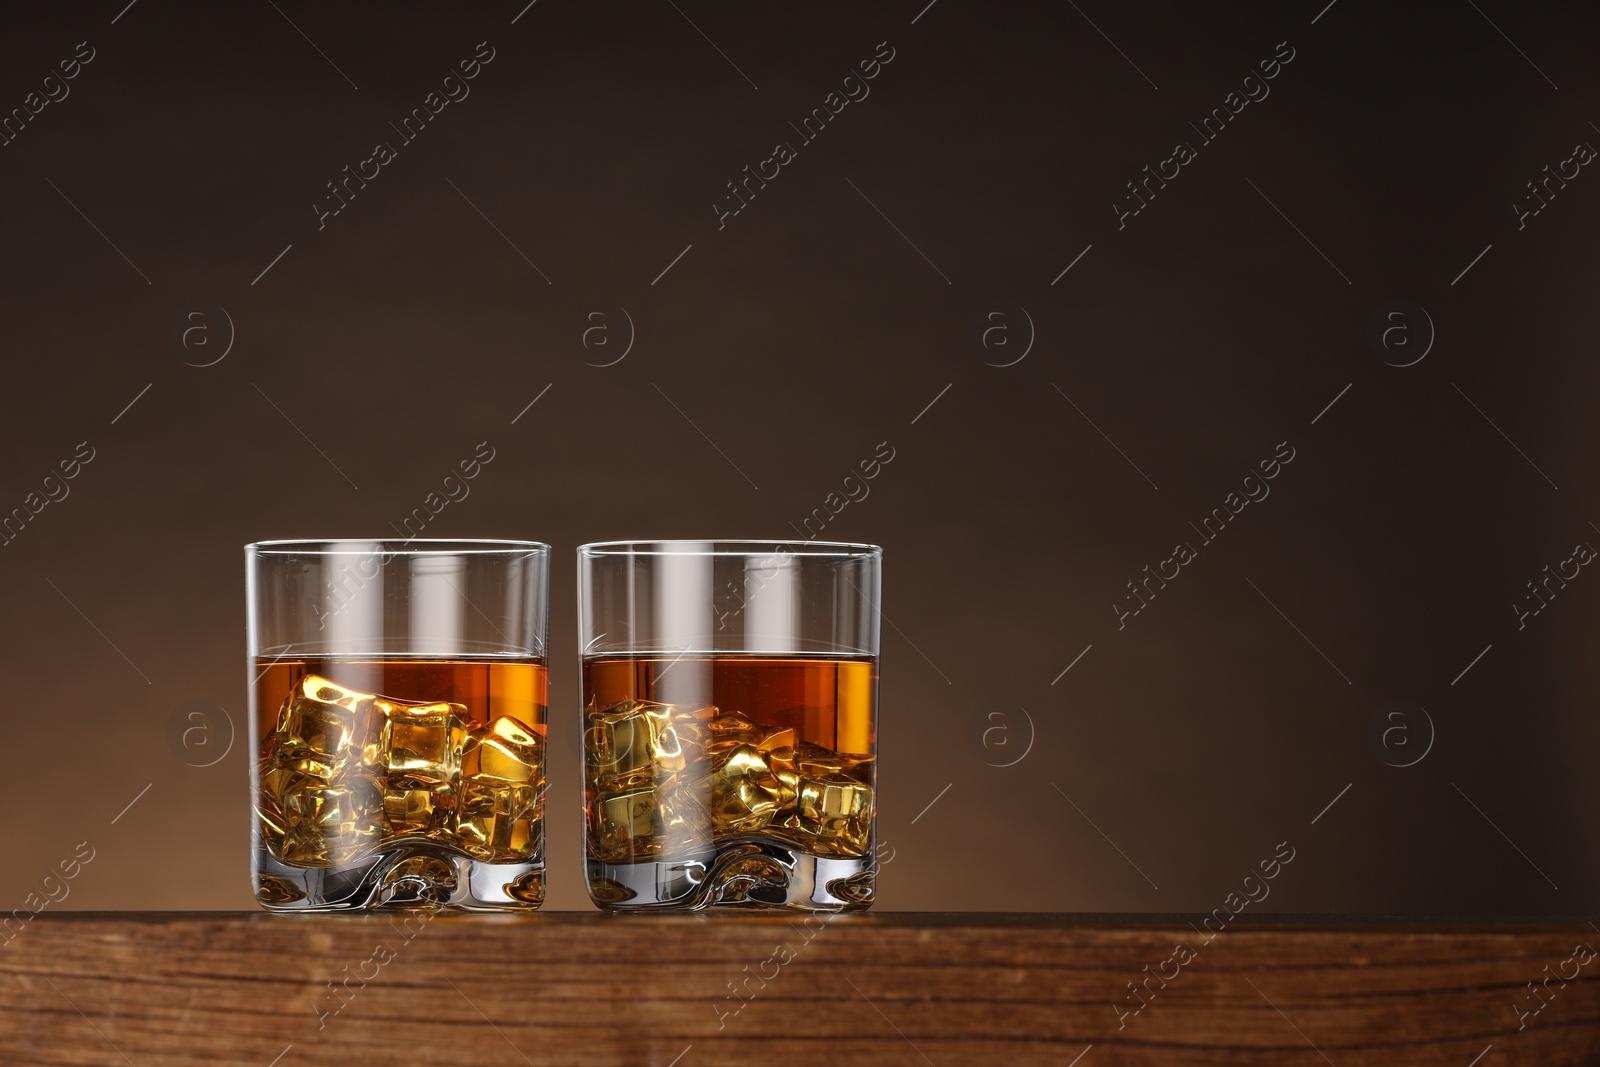 Photo of Whiskey with ice cubes in glasses on wooden table against brown background, space for text